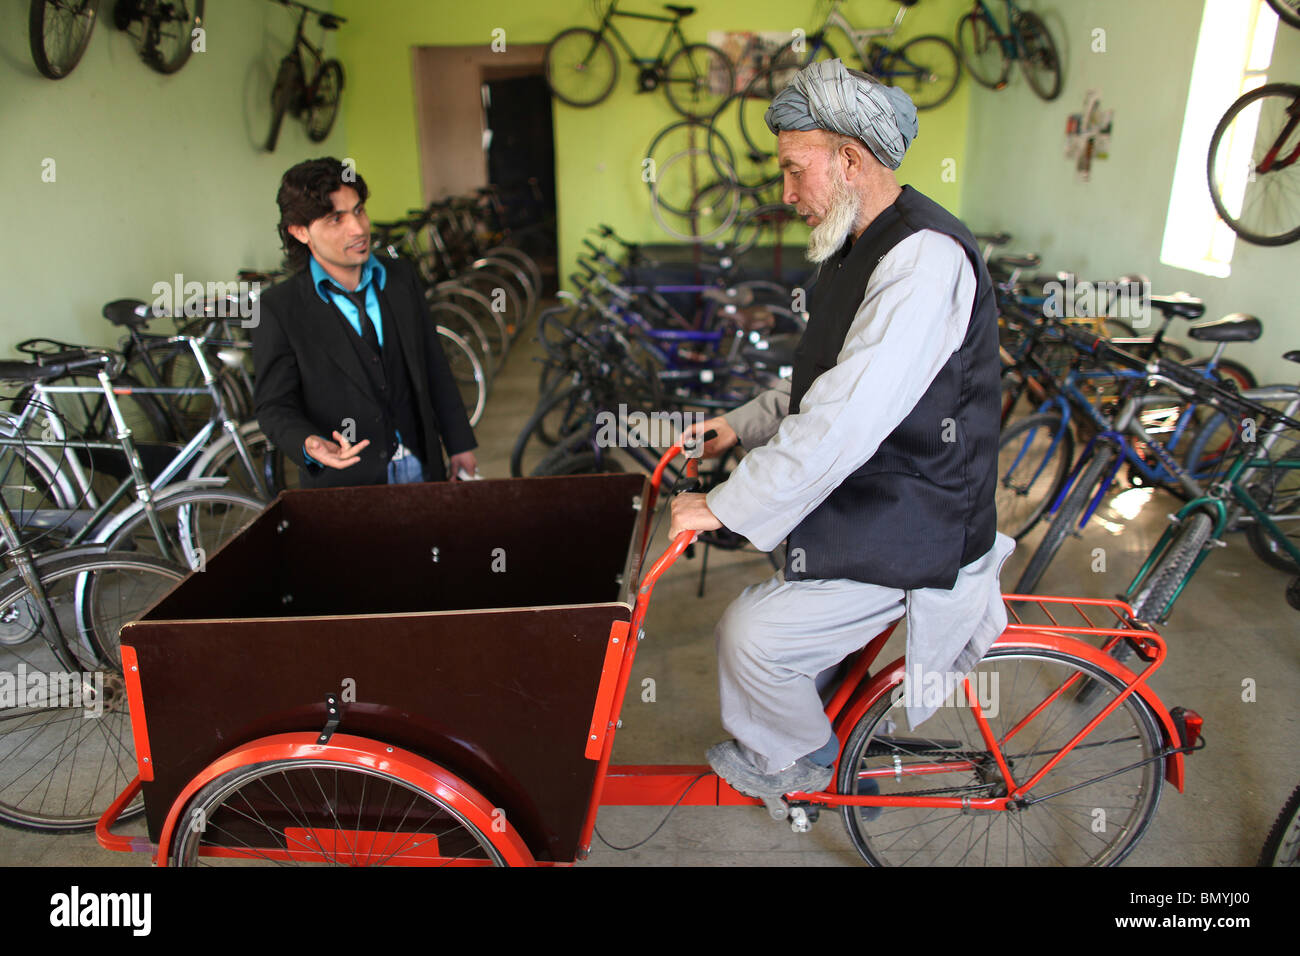 afghan afghani afghanistan afghans area bice bices bicycle bicycles bicyclet capital city daily life donation kabul man musli Stock Photo